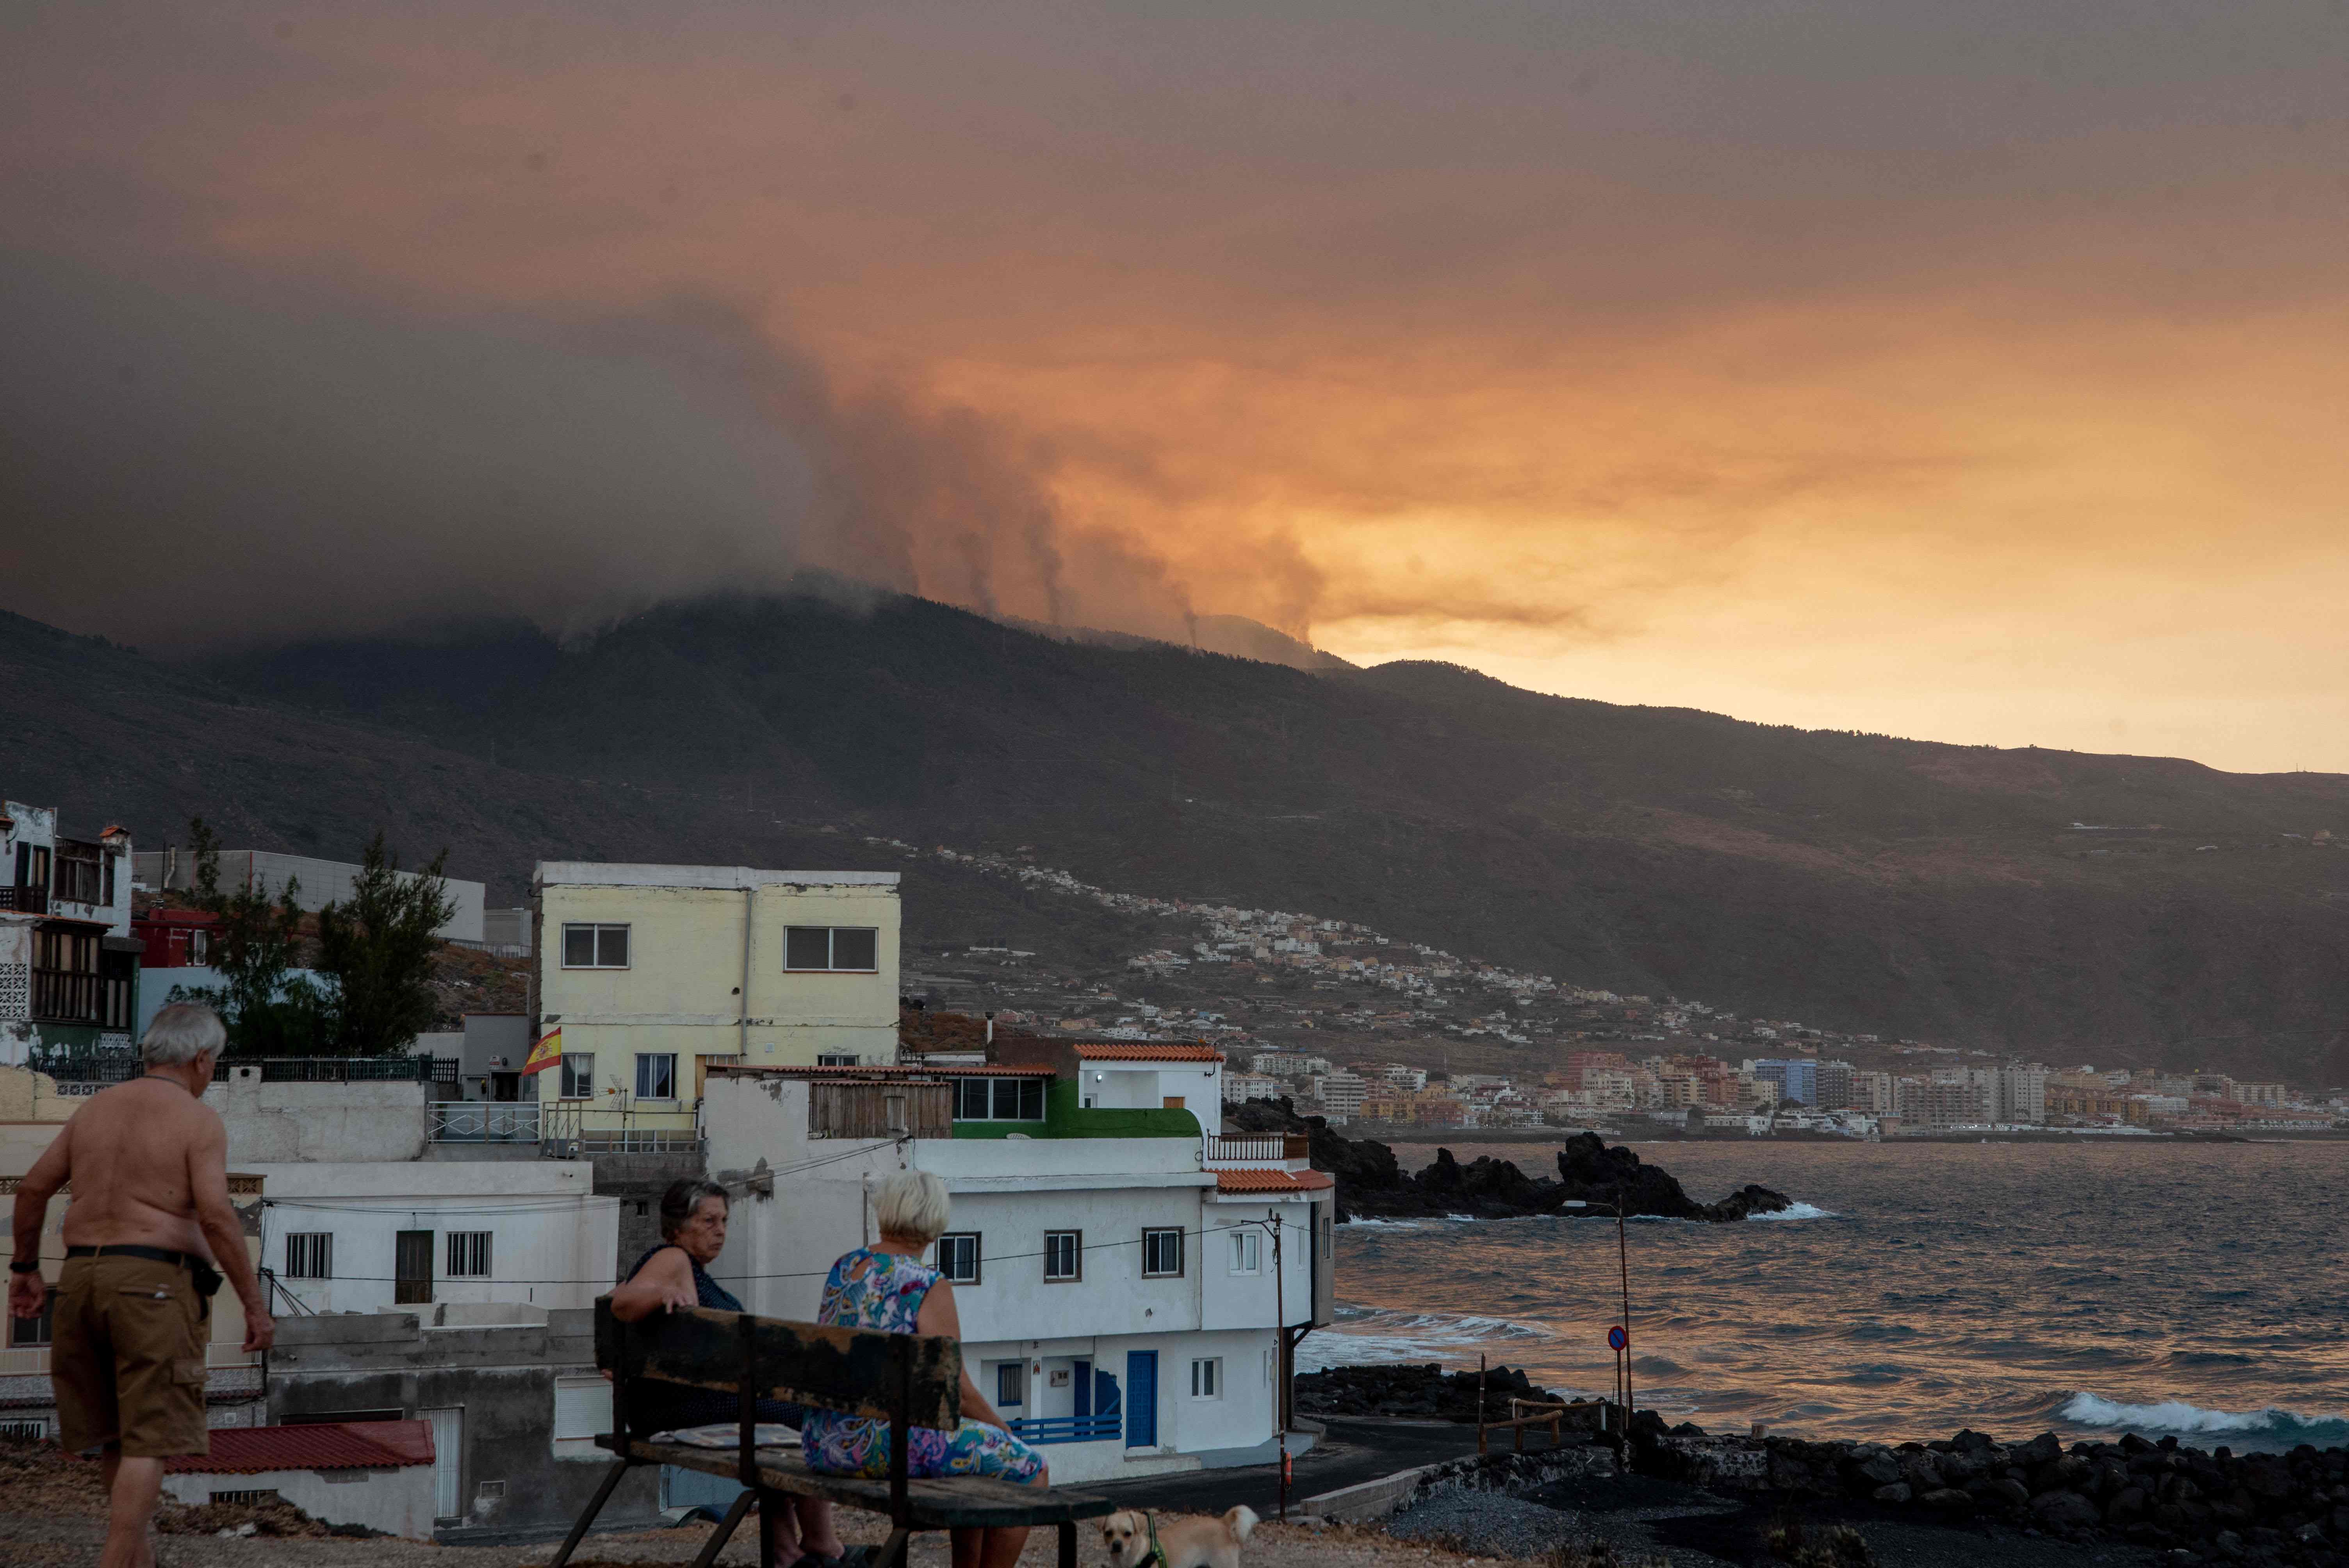 A cloud of smoke billows over the village of Candelaria on 17 August